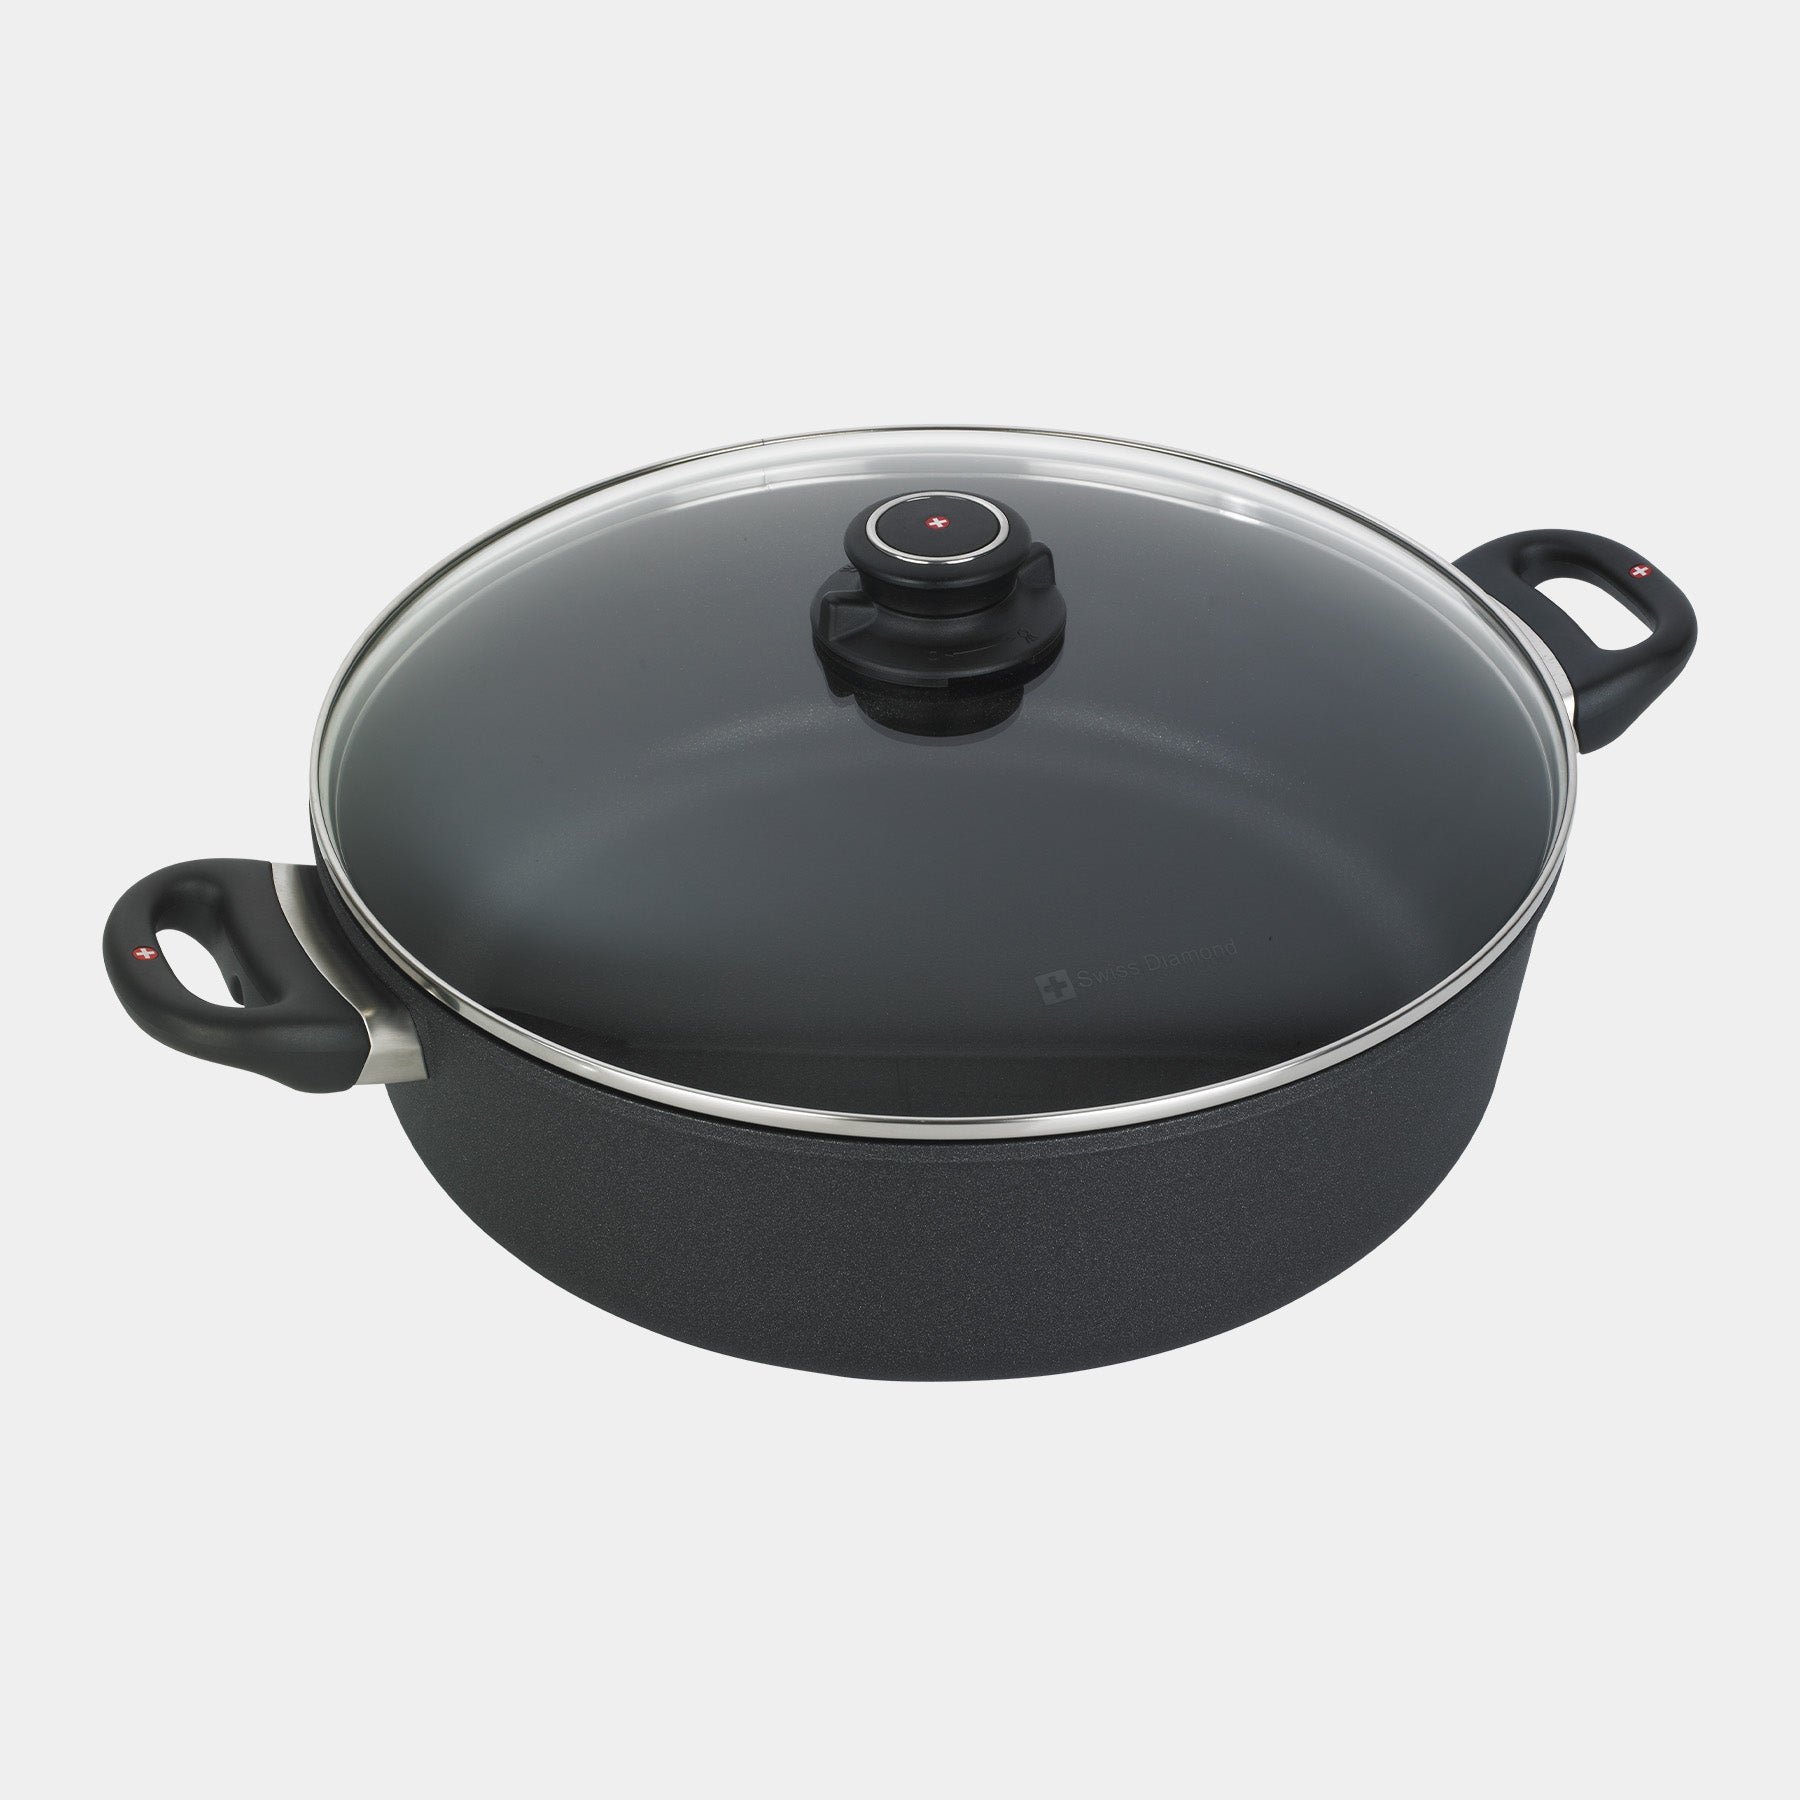 XD Nonstick 7.2 qt Braiser with Glass Lid - Induction